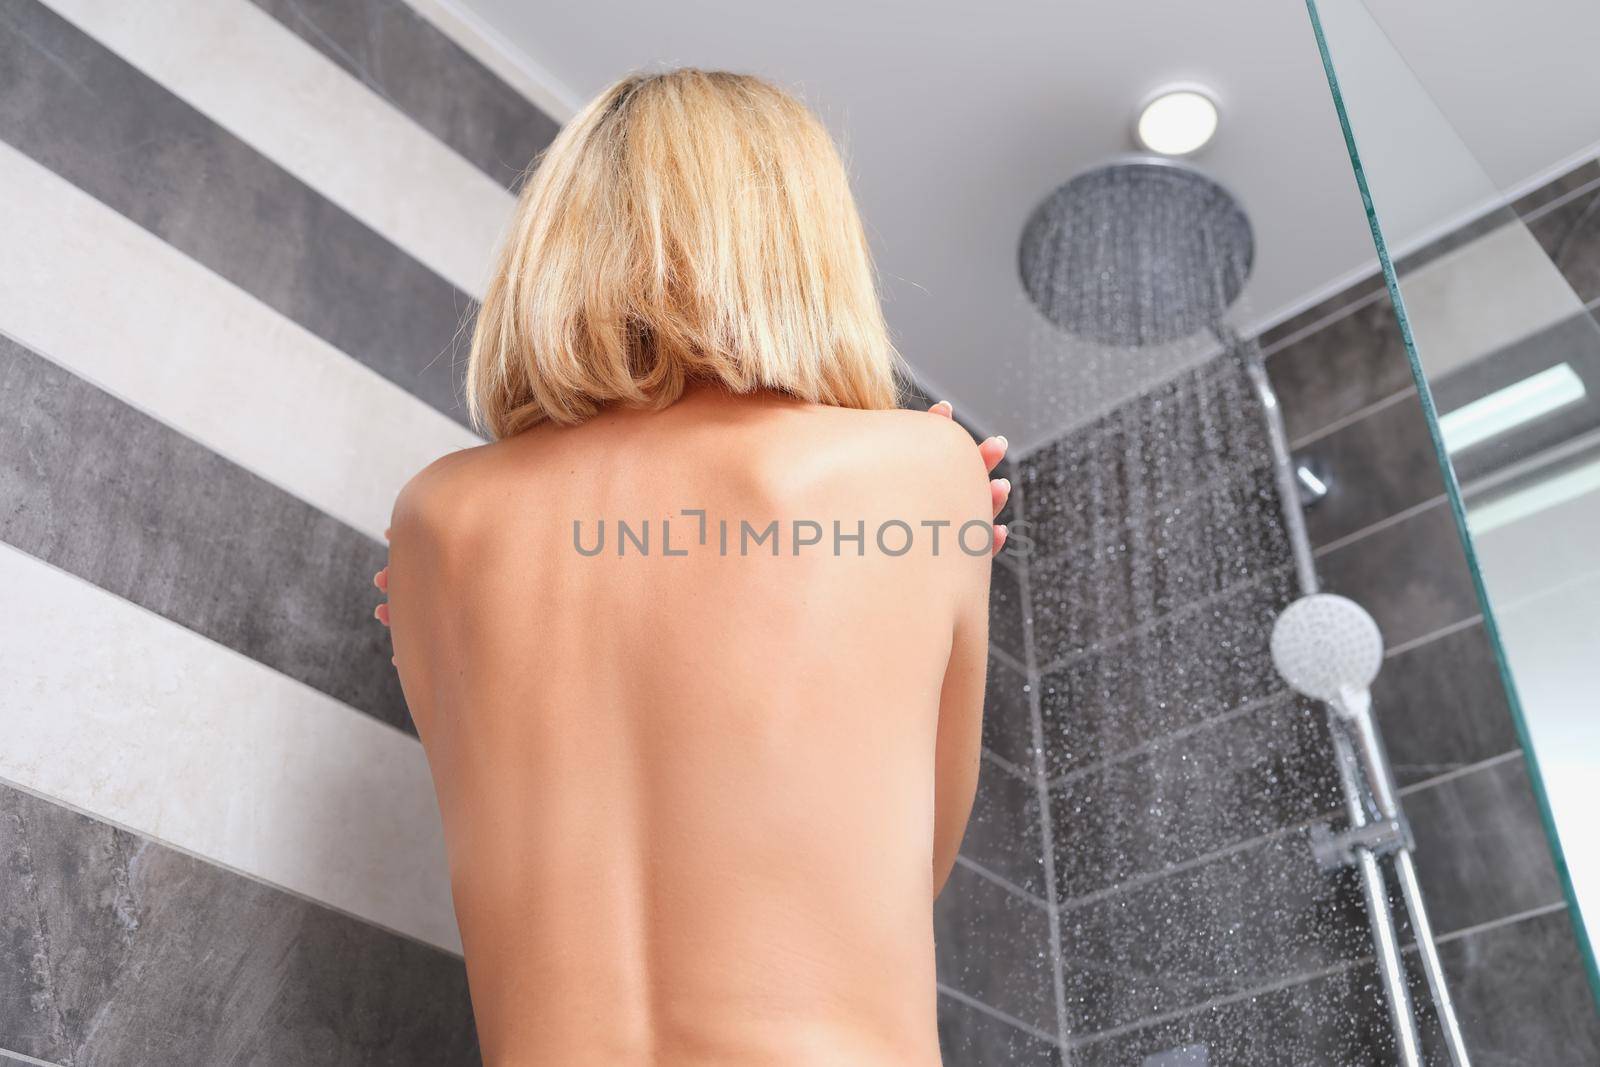 Naked woman bathes in shower and feels relaxed and clean by kuprevich